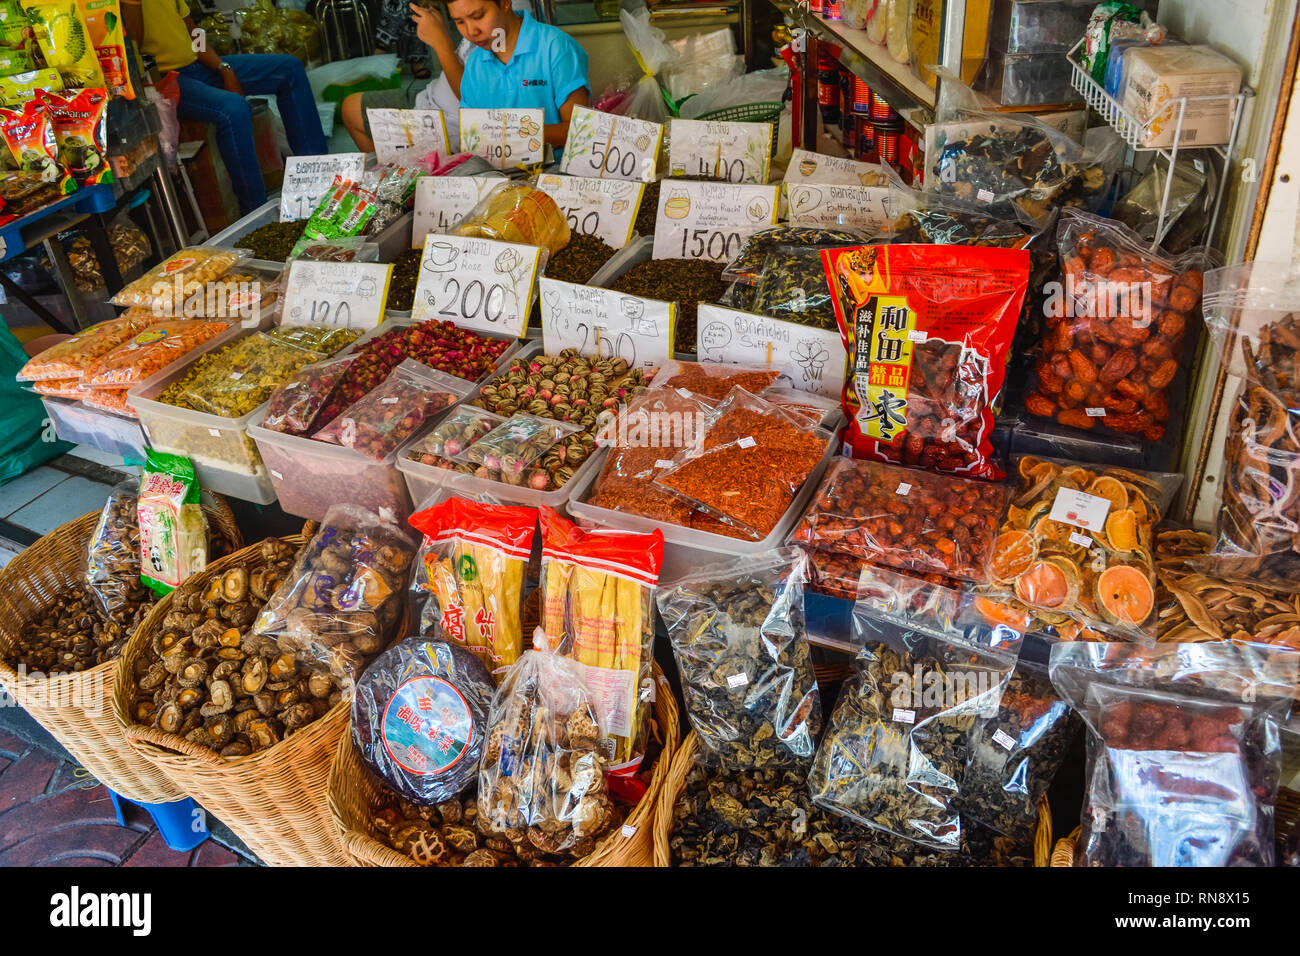 Thai food on the street is popular and sell well, not less than Pad Thai and Tom Yum Shrimp are various curries. Insect, fresh frogs, vegetables, frui Stock Photo